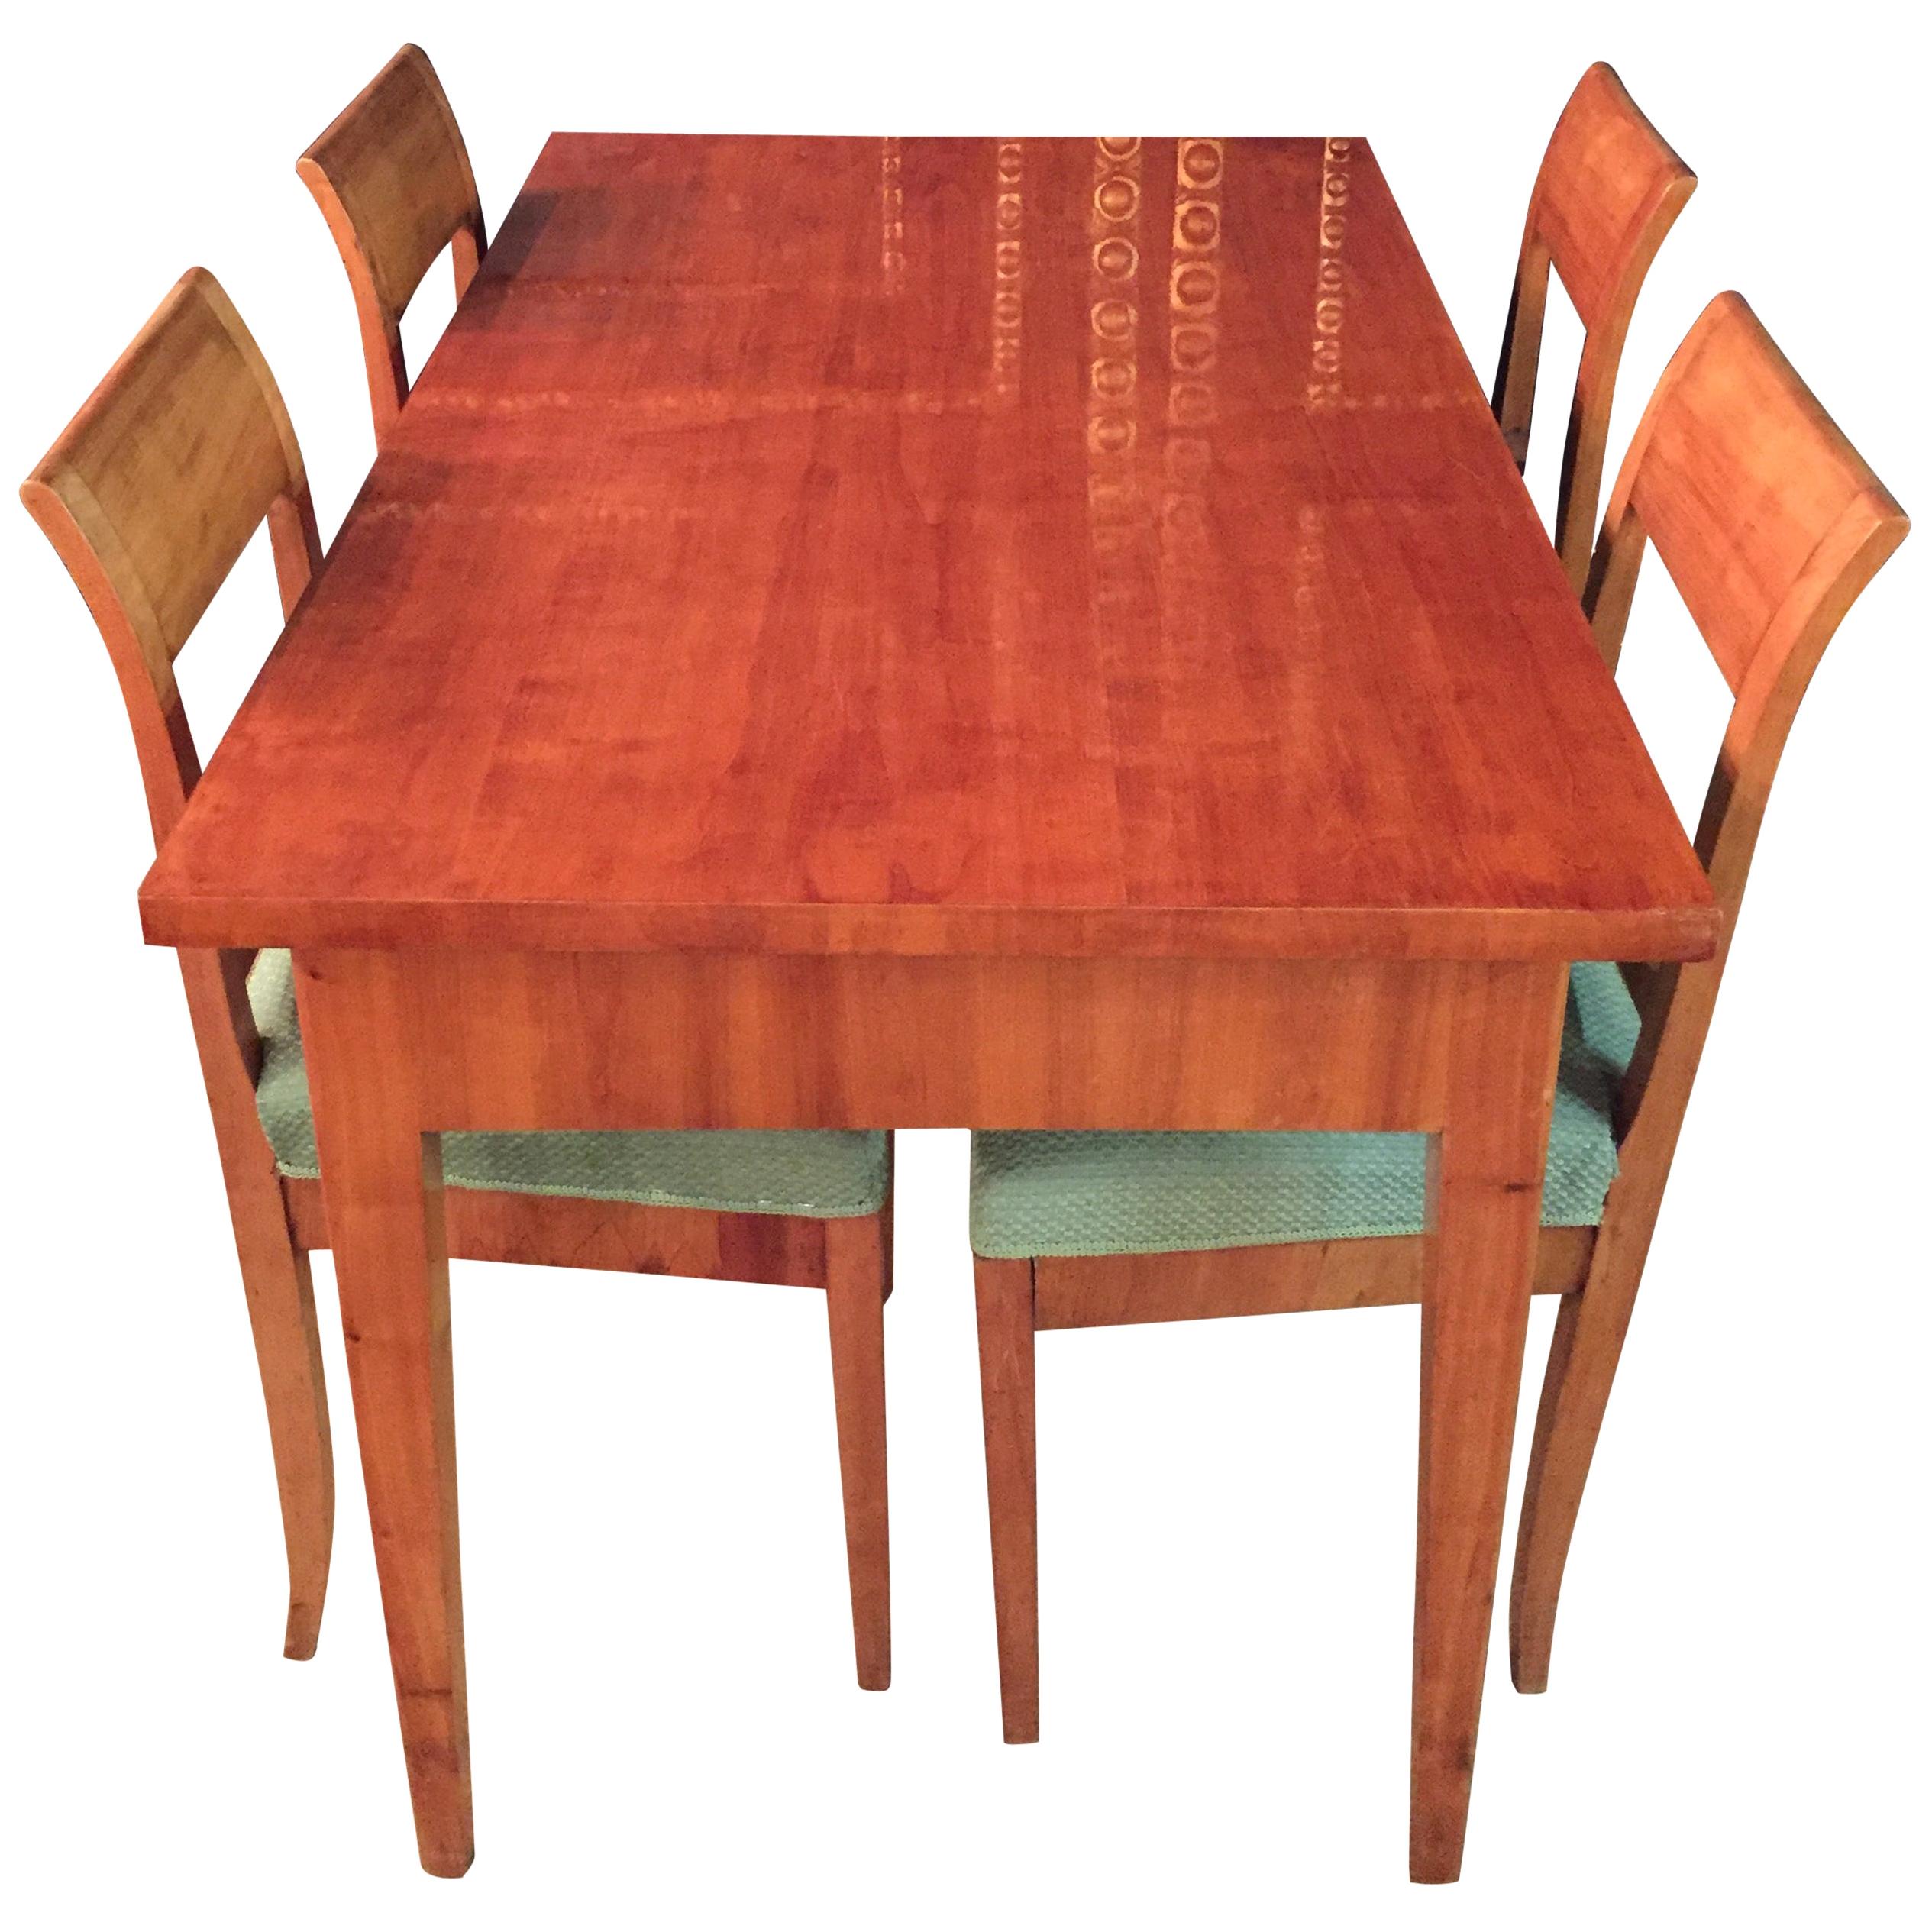 19th Century Original Biedermeier Dining Room /Dining Table with 4 Chairs Cherry